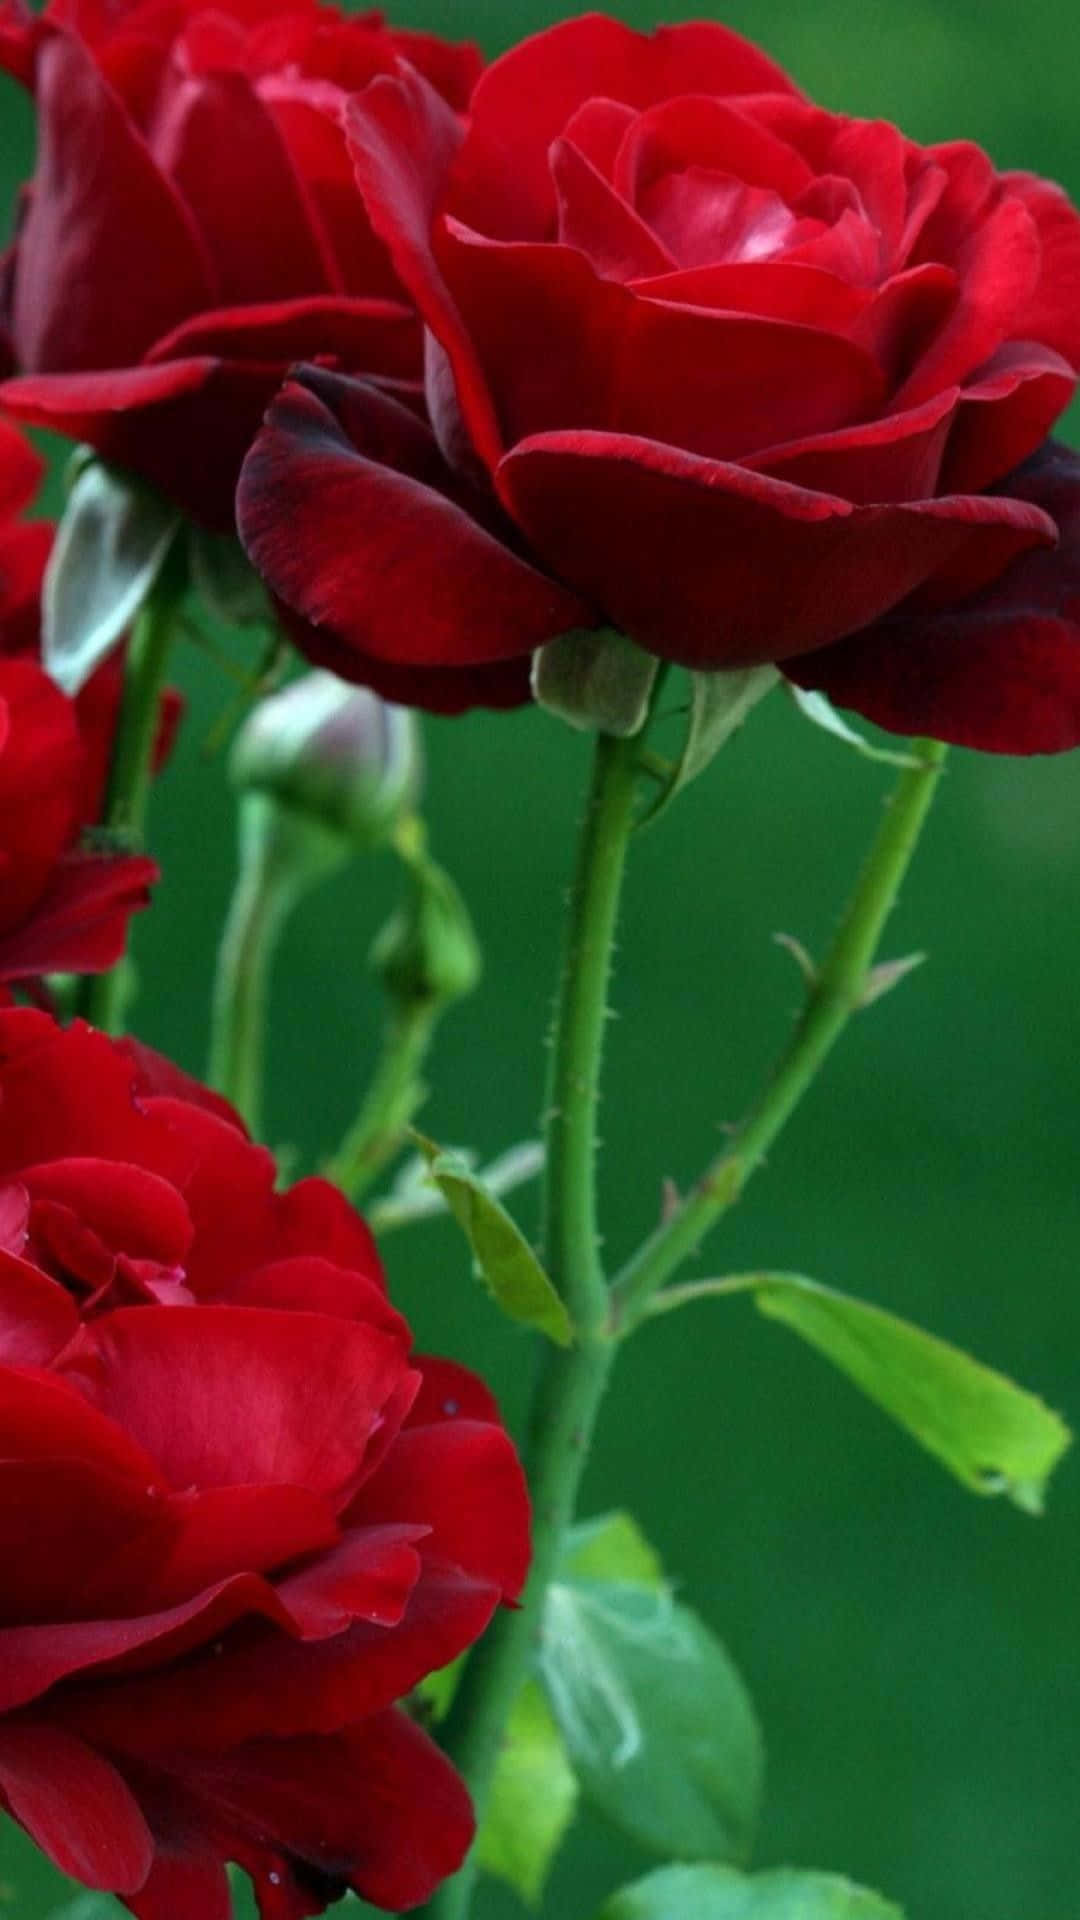 Red Roses Wallpapers Hd - Wallpapers For Desktop